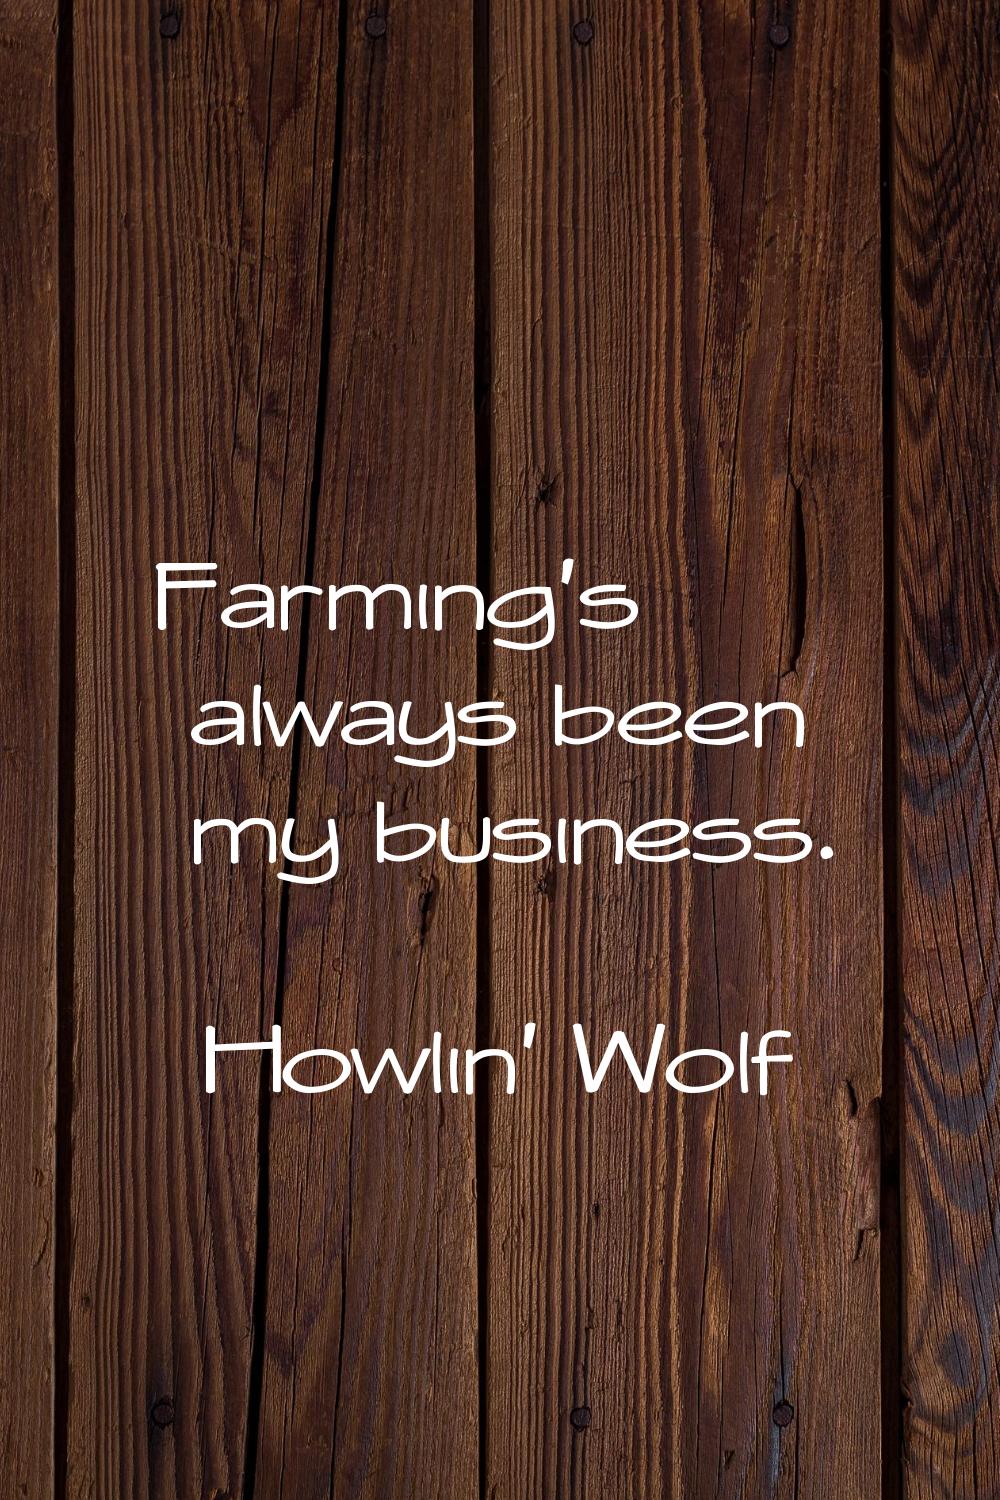 Farming's always been my business.